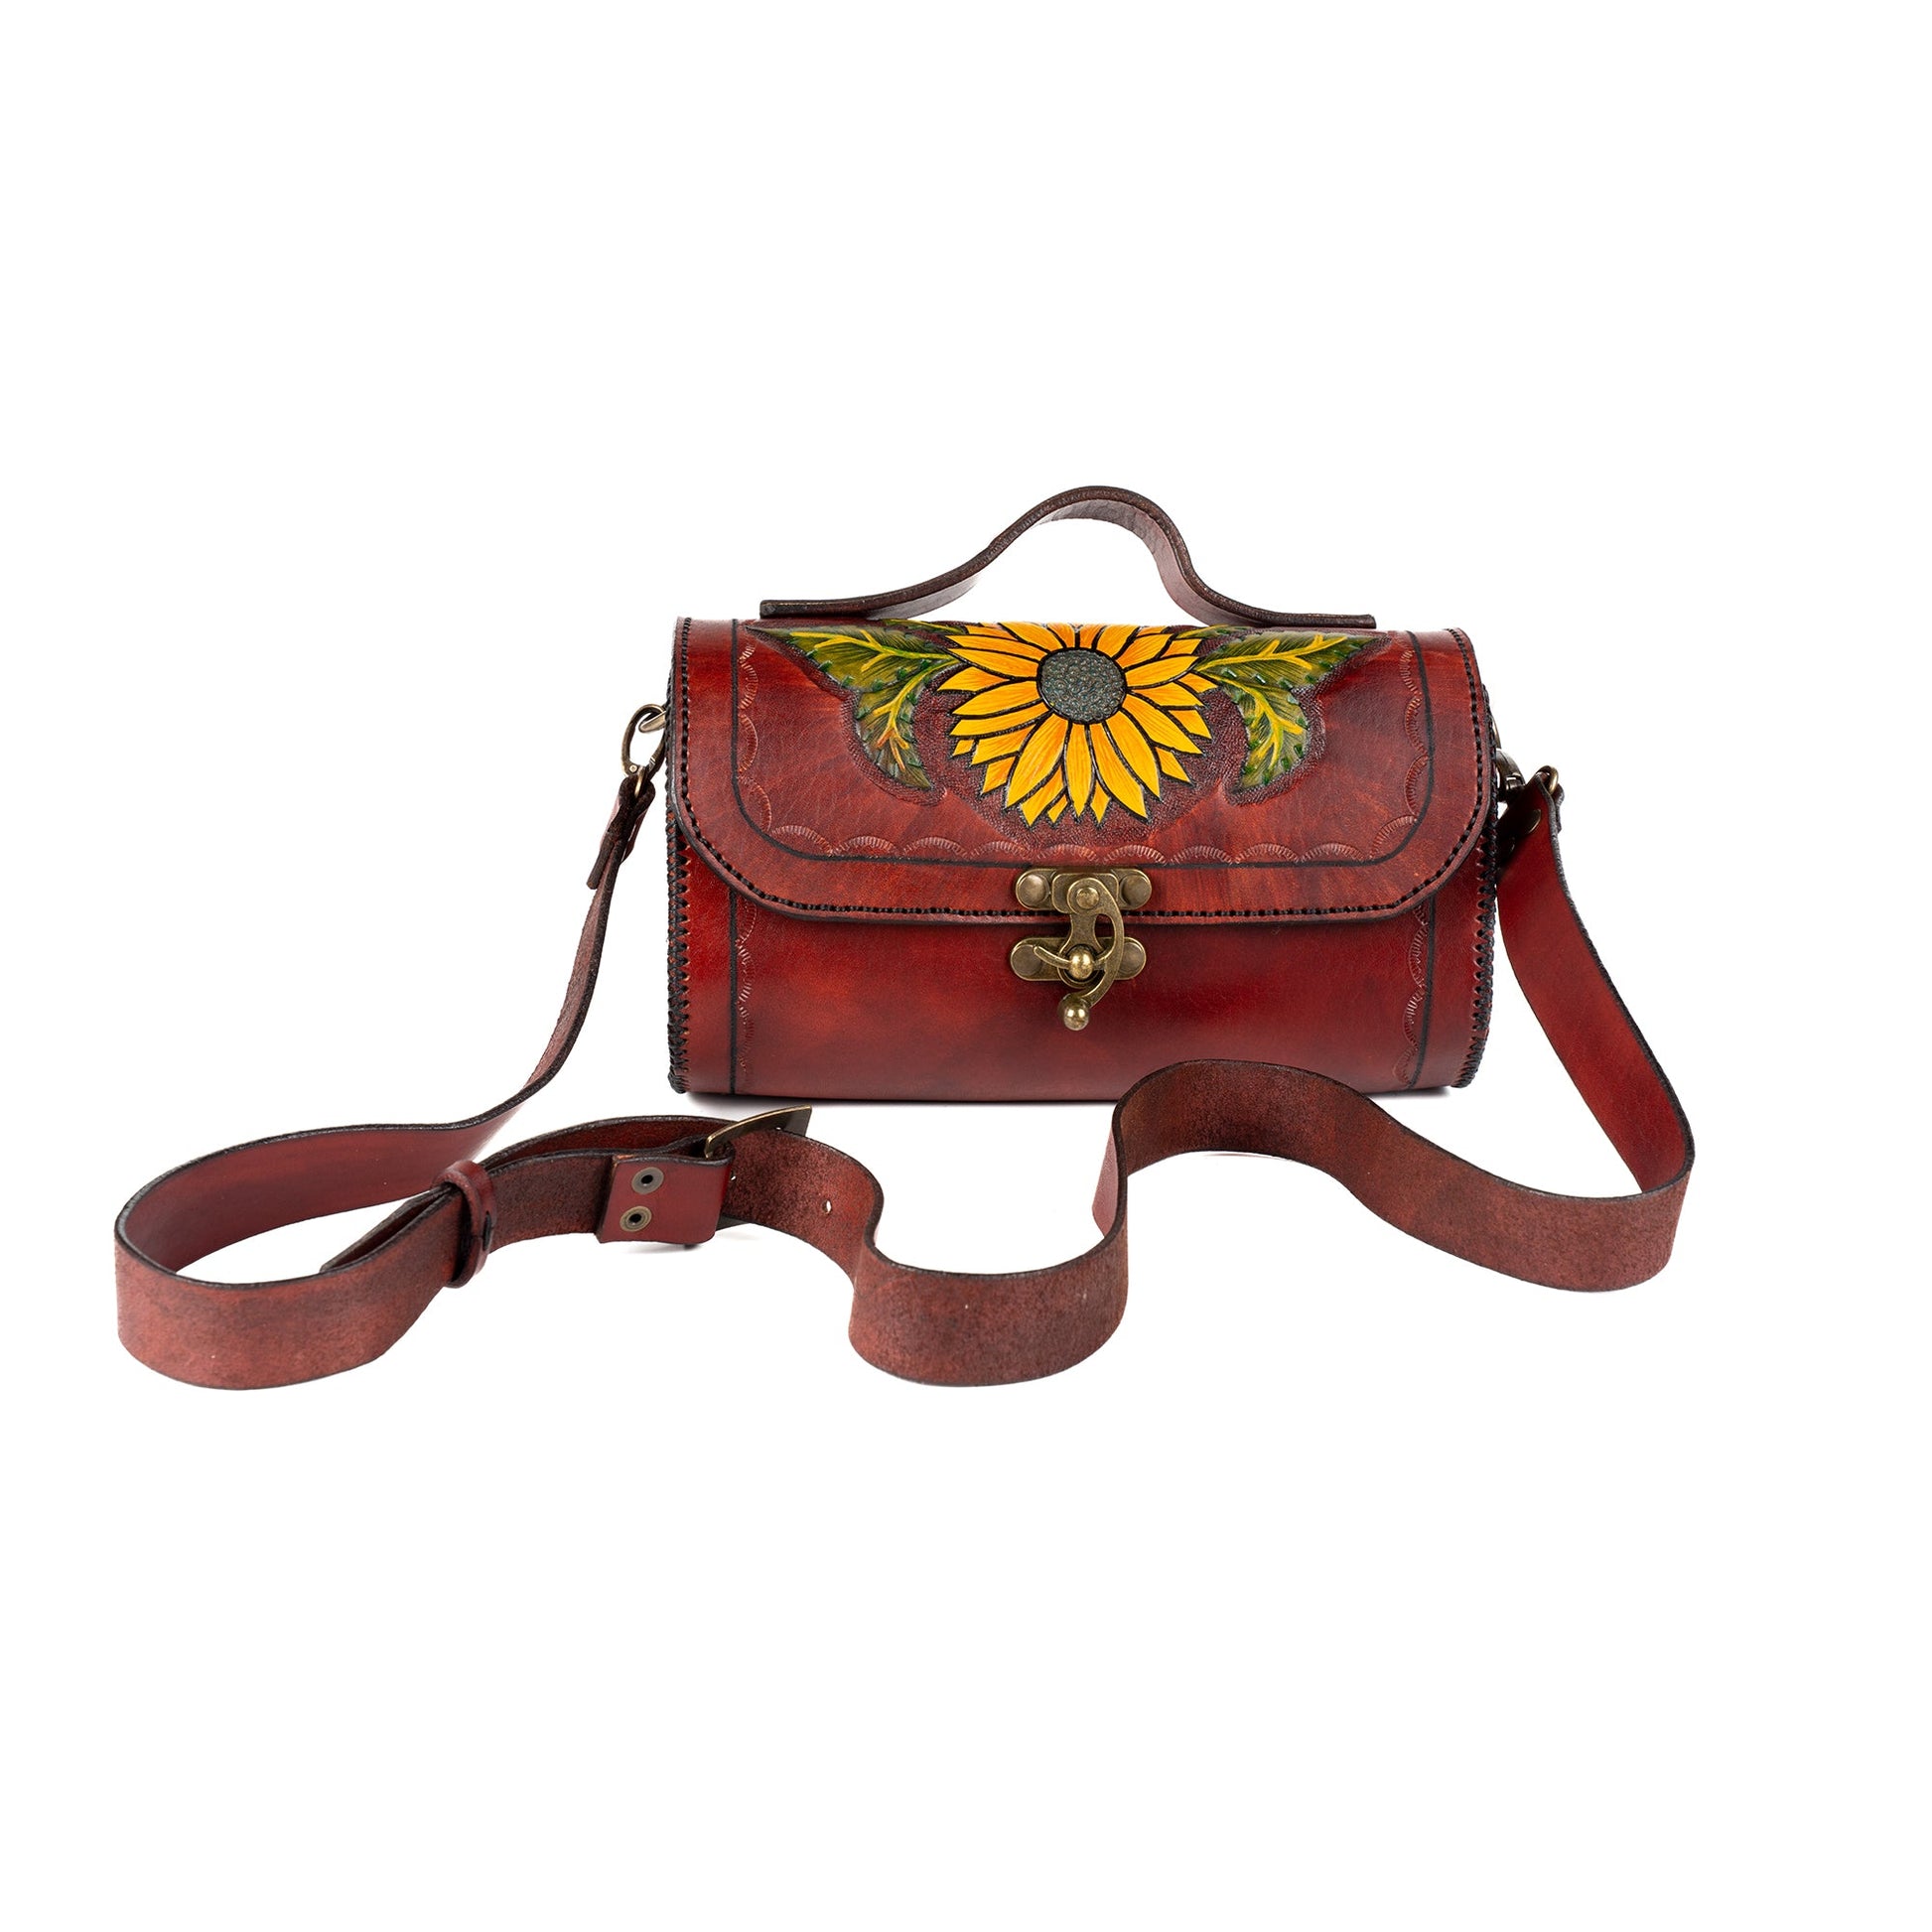 Leila Leather Carved & Crafted Hand Bag - Handbags Zengoda Shop online from Artisan Brands